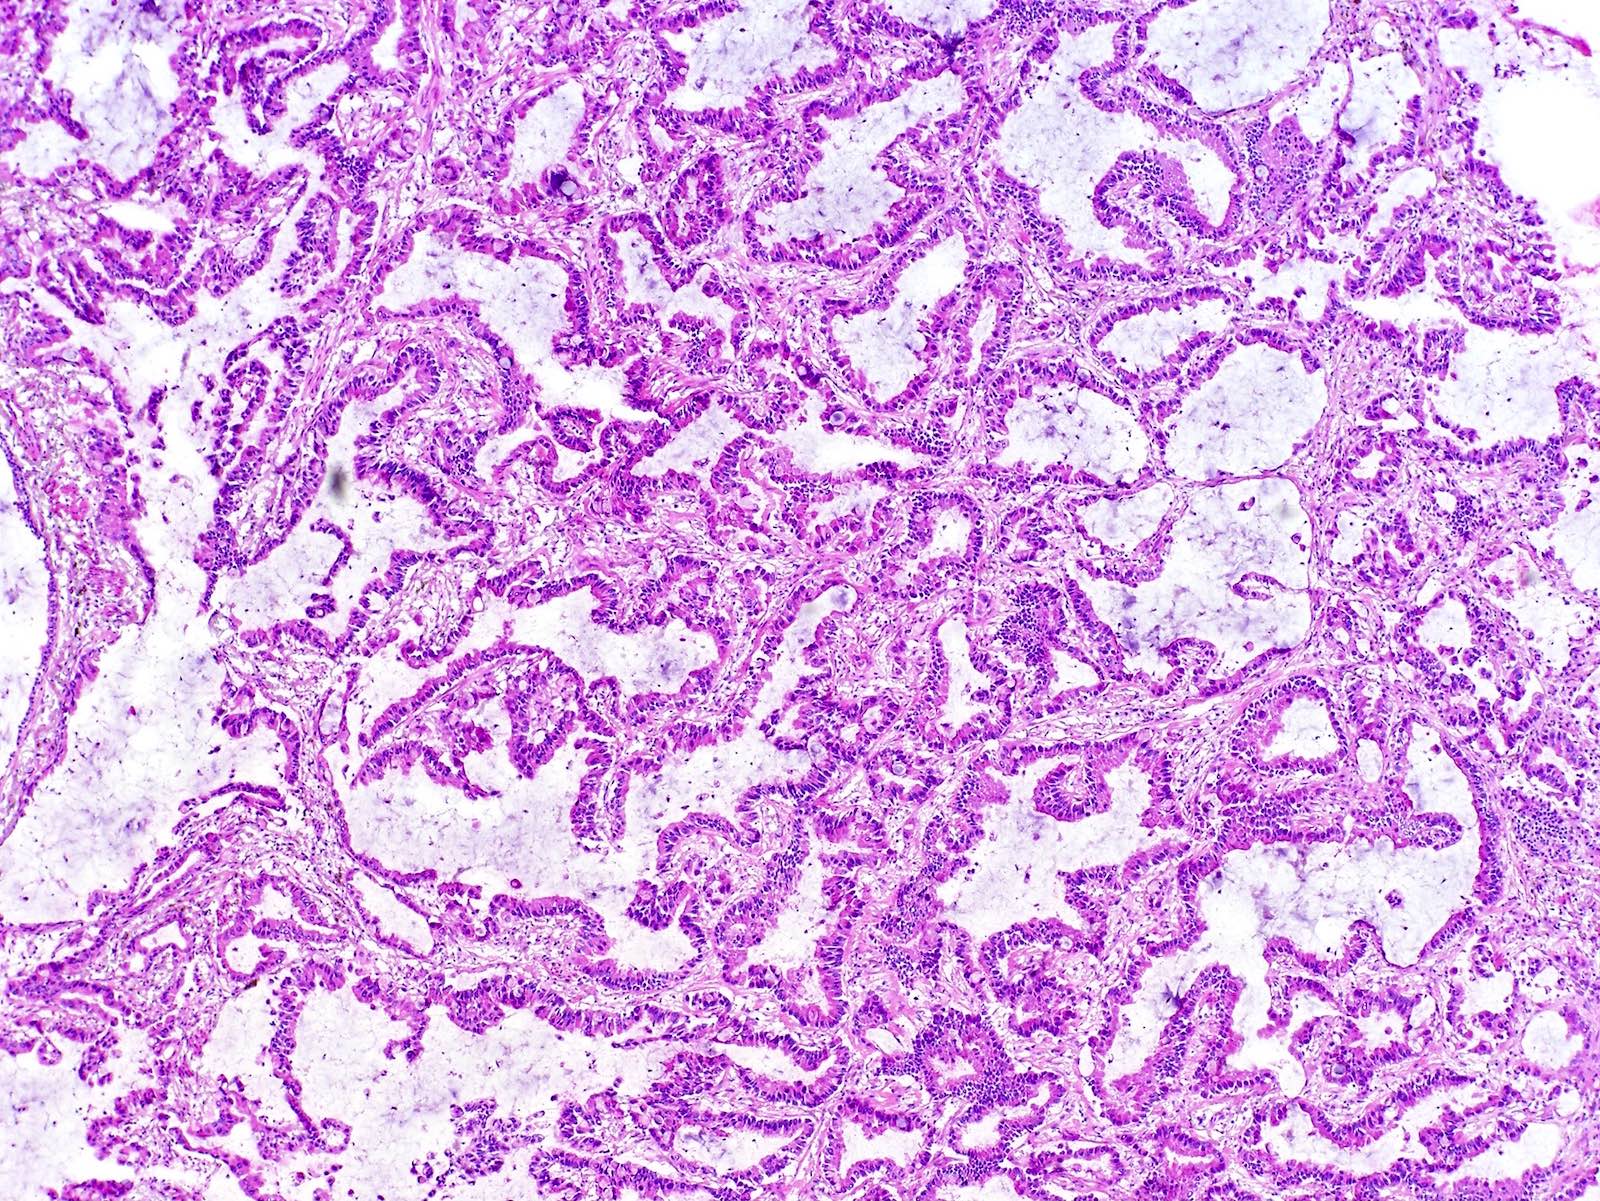 Lung Carcinoma Histology